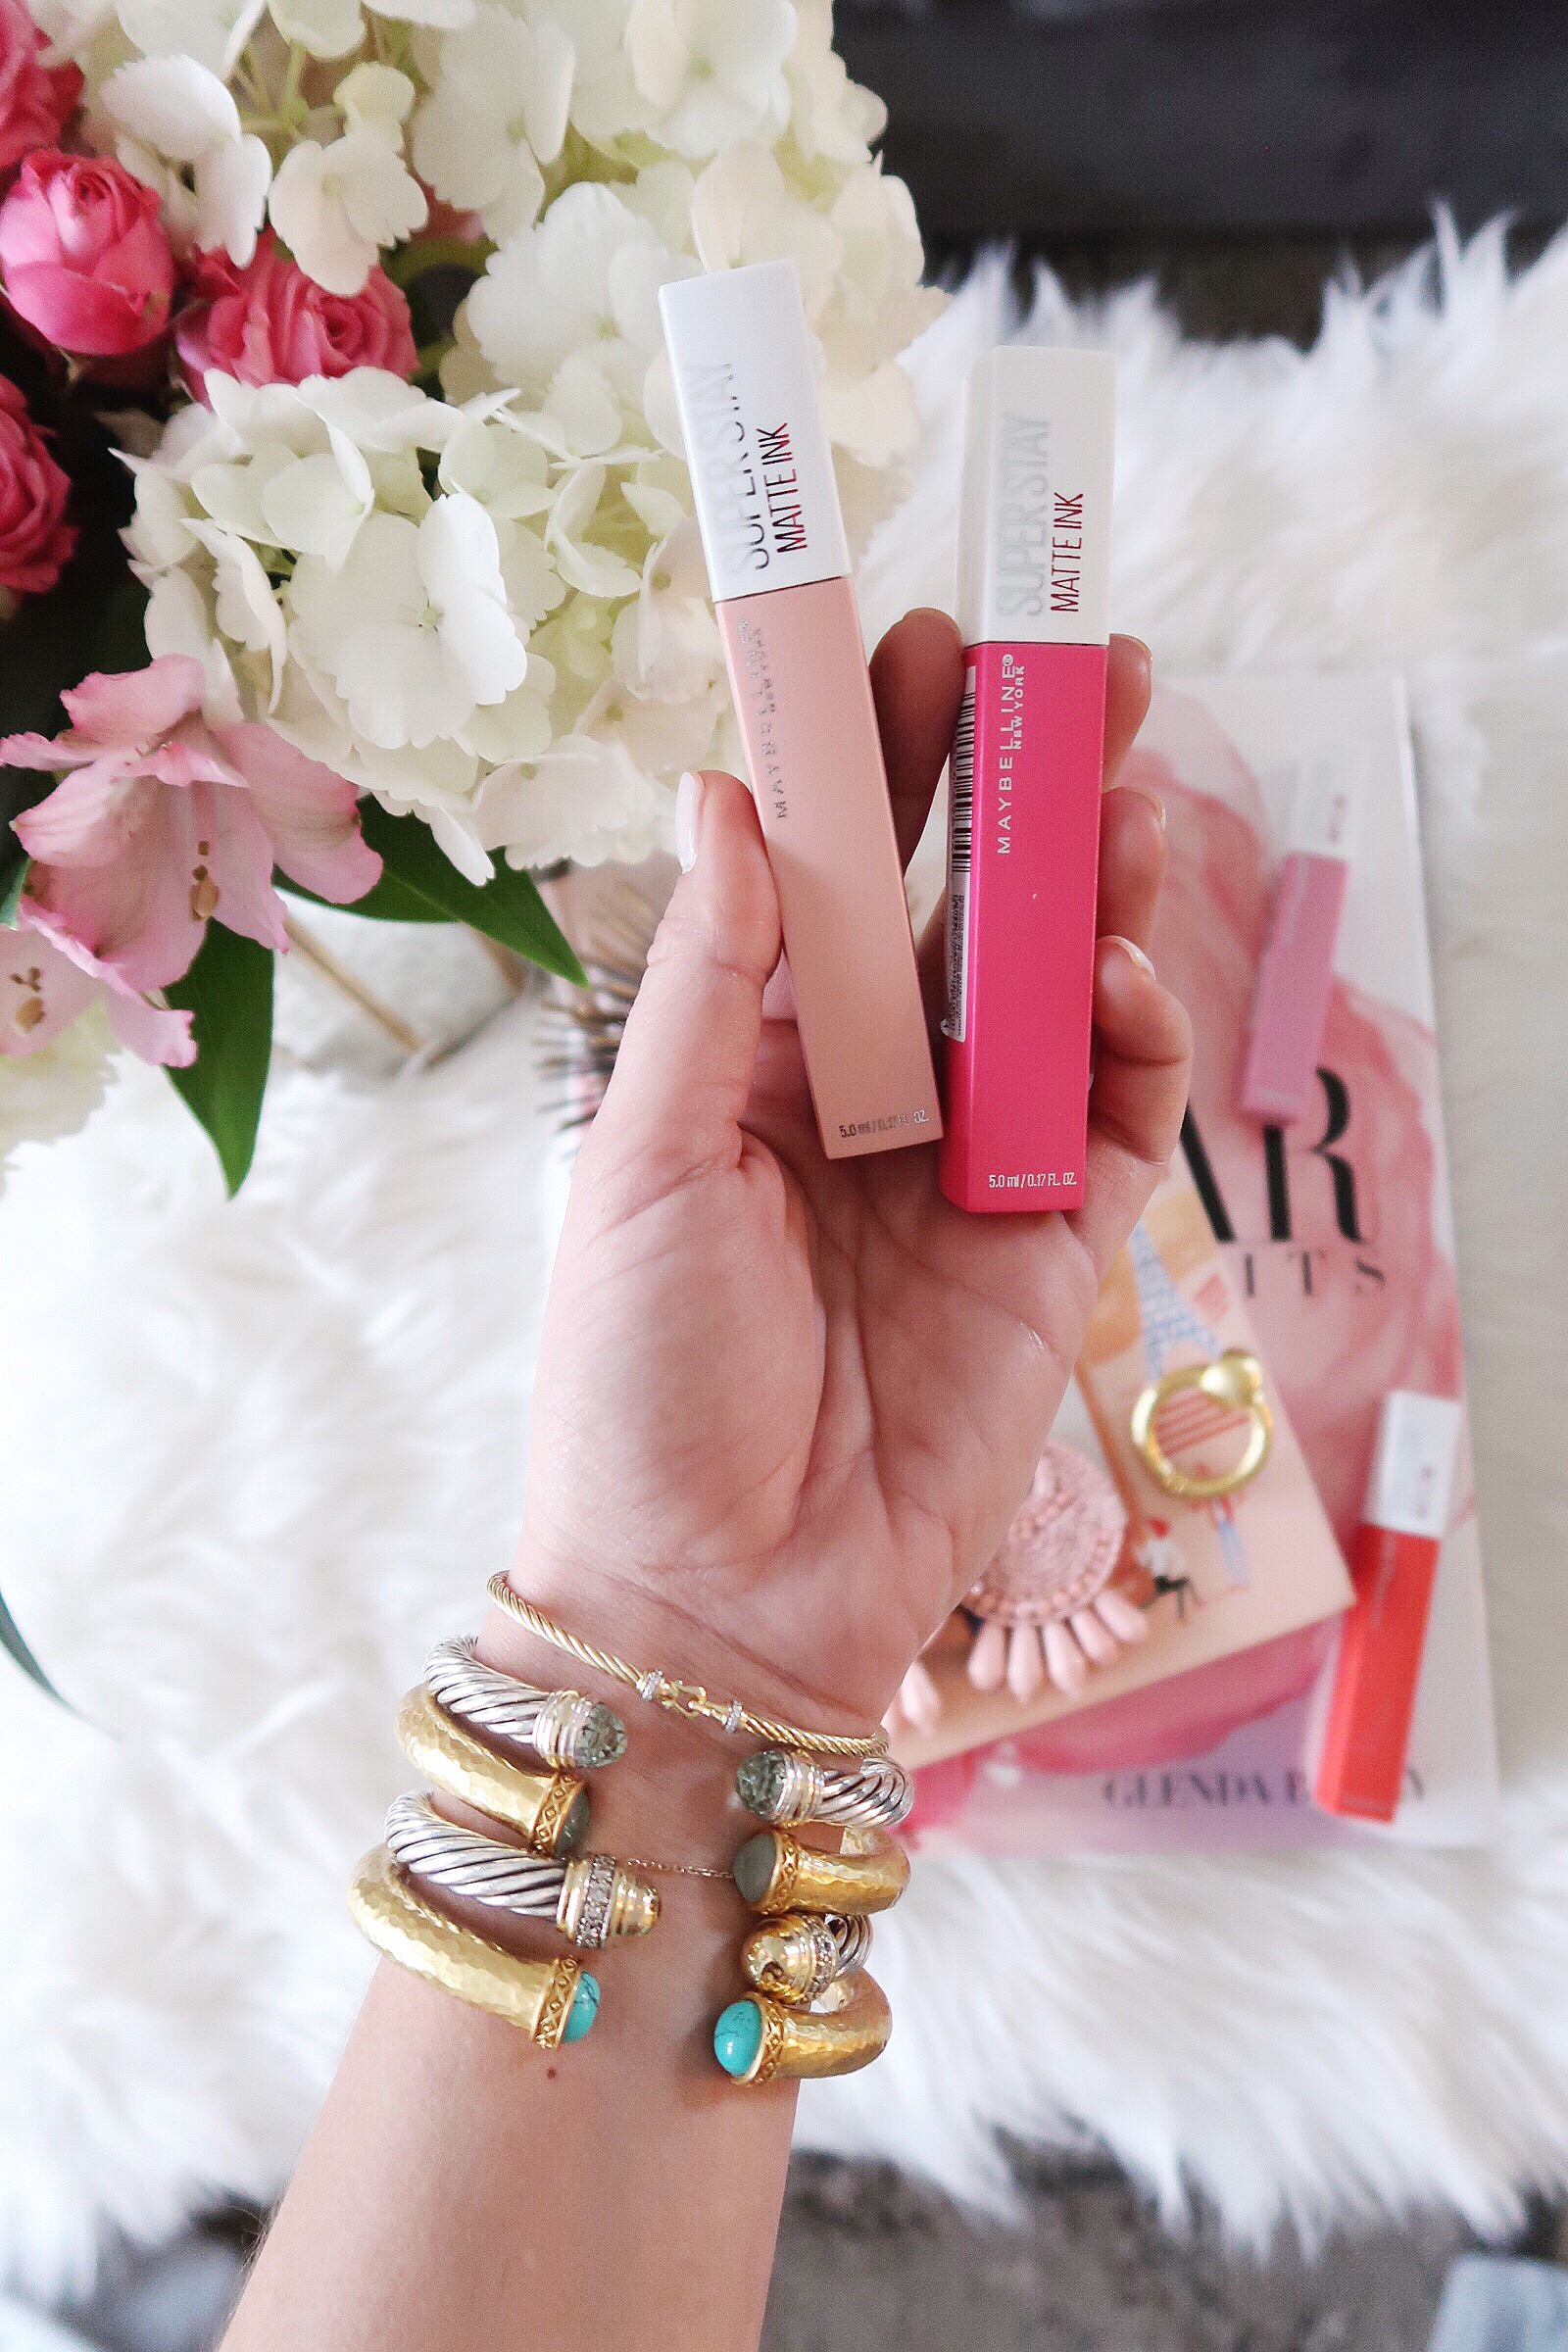 Maybelline Super Stay Ink Liquid Lipstick Review & Swatches